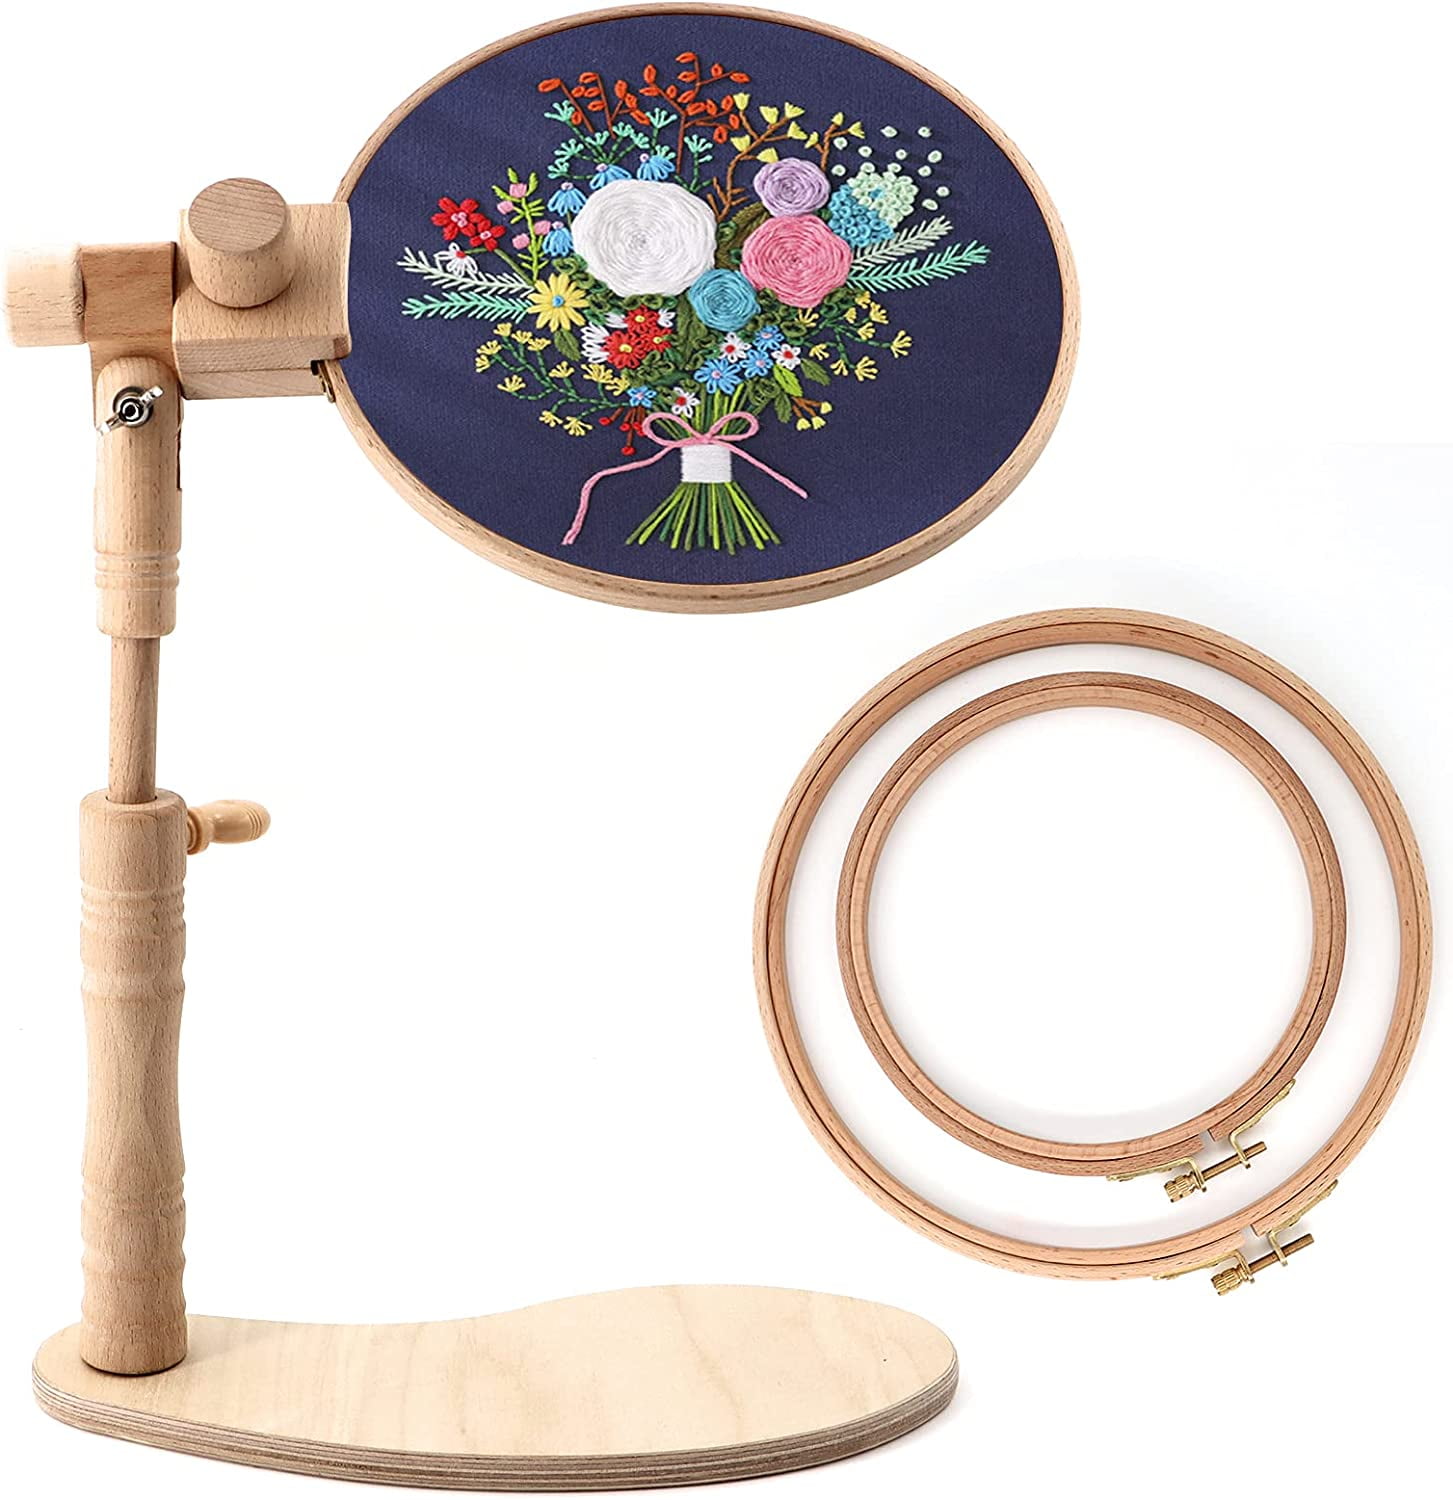 Adjustable Embroidery Hoop Stand - Rotated Cross Stitch Stand, Universal  Beech Wood Embroidery Hoop Holder, Hands Free Needlework Stand for Art  Craft